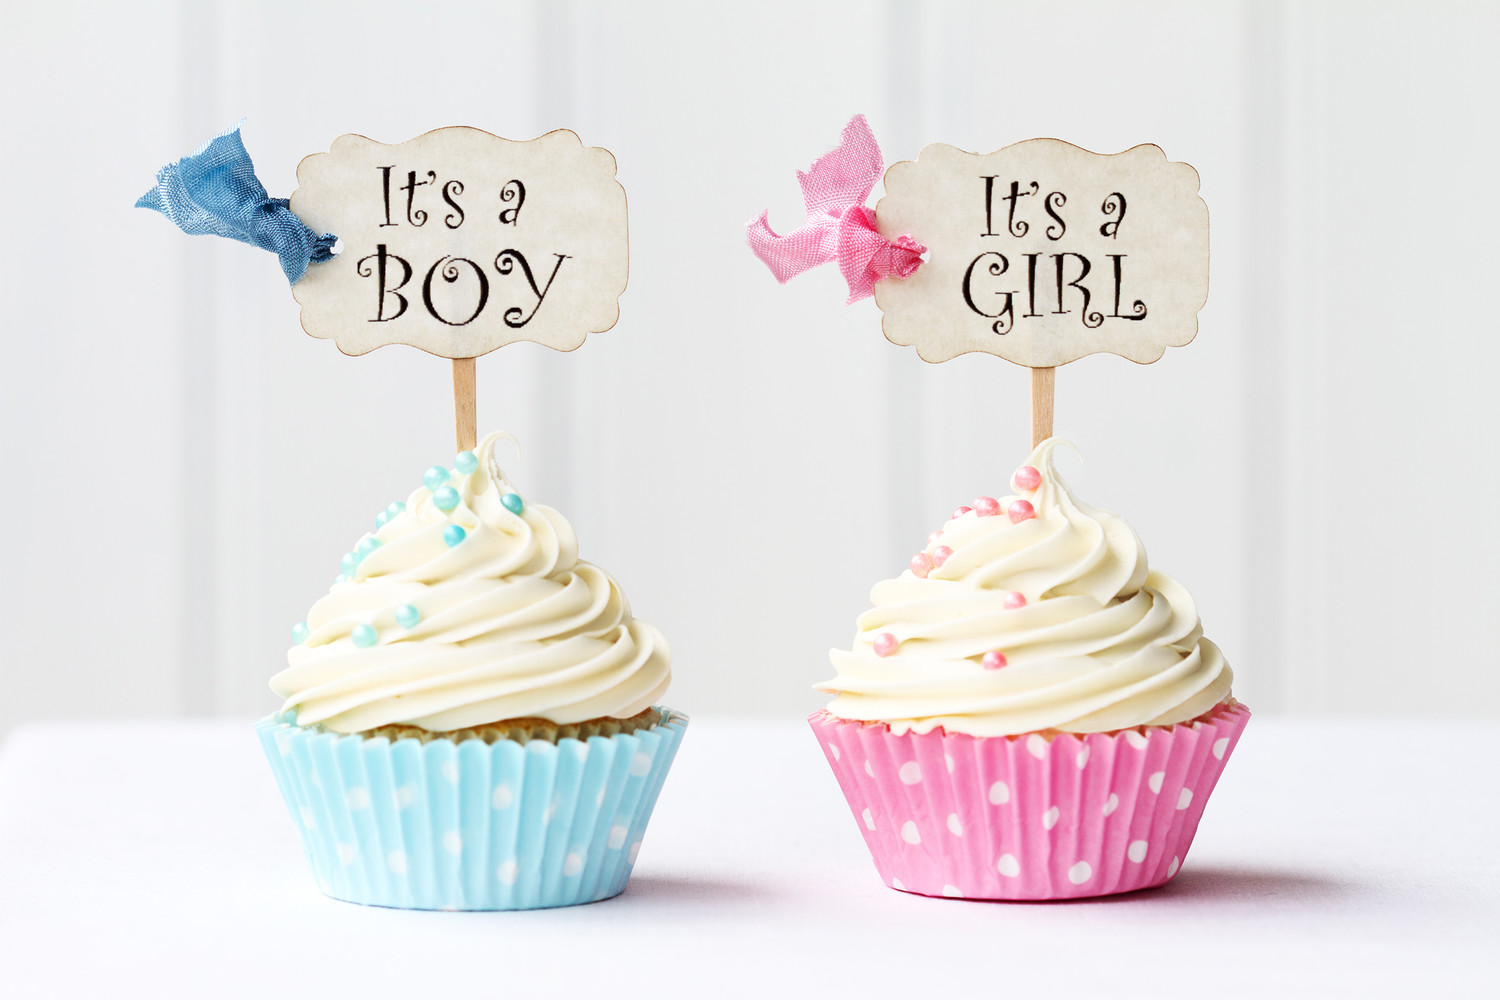 35 Gender Prediction Tests How To Find Out If Its A Boy Or A Girl? image